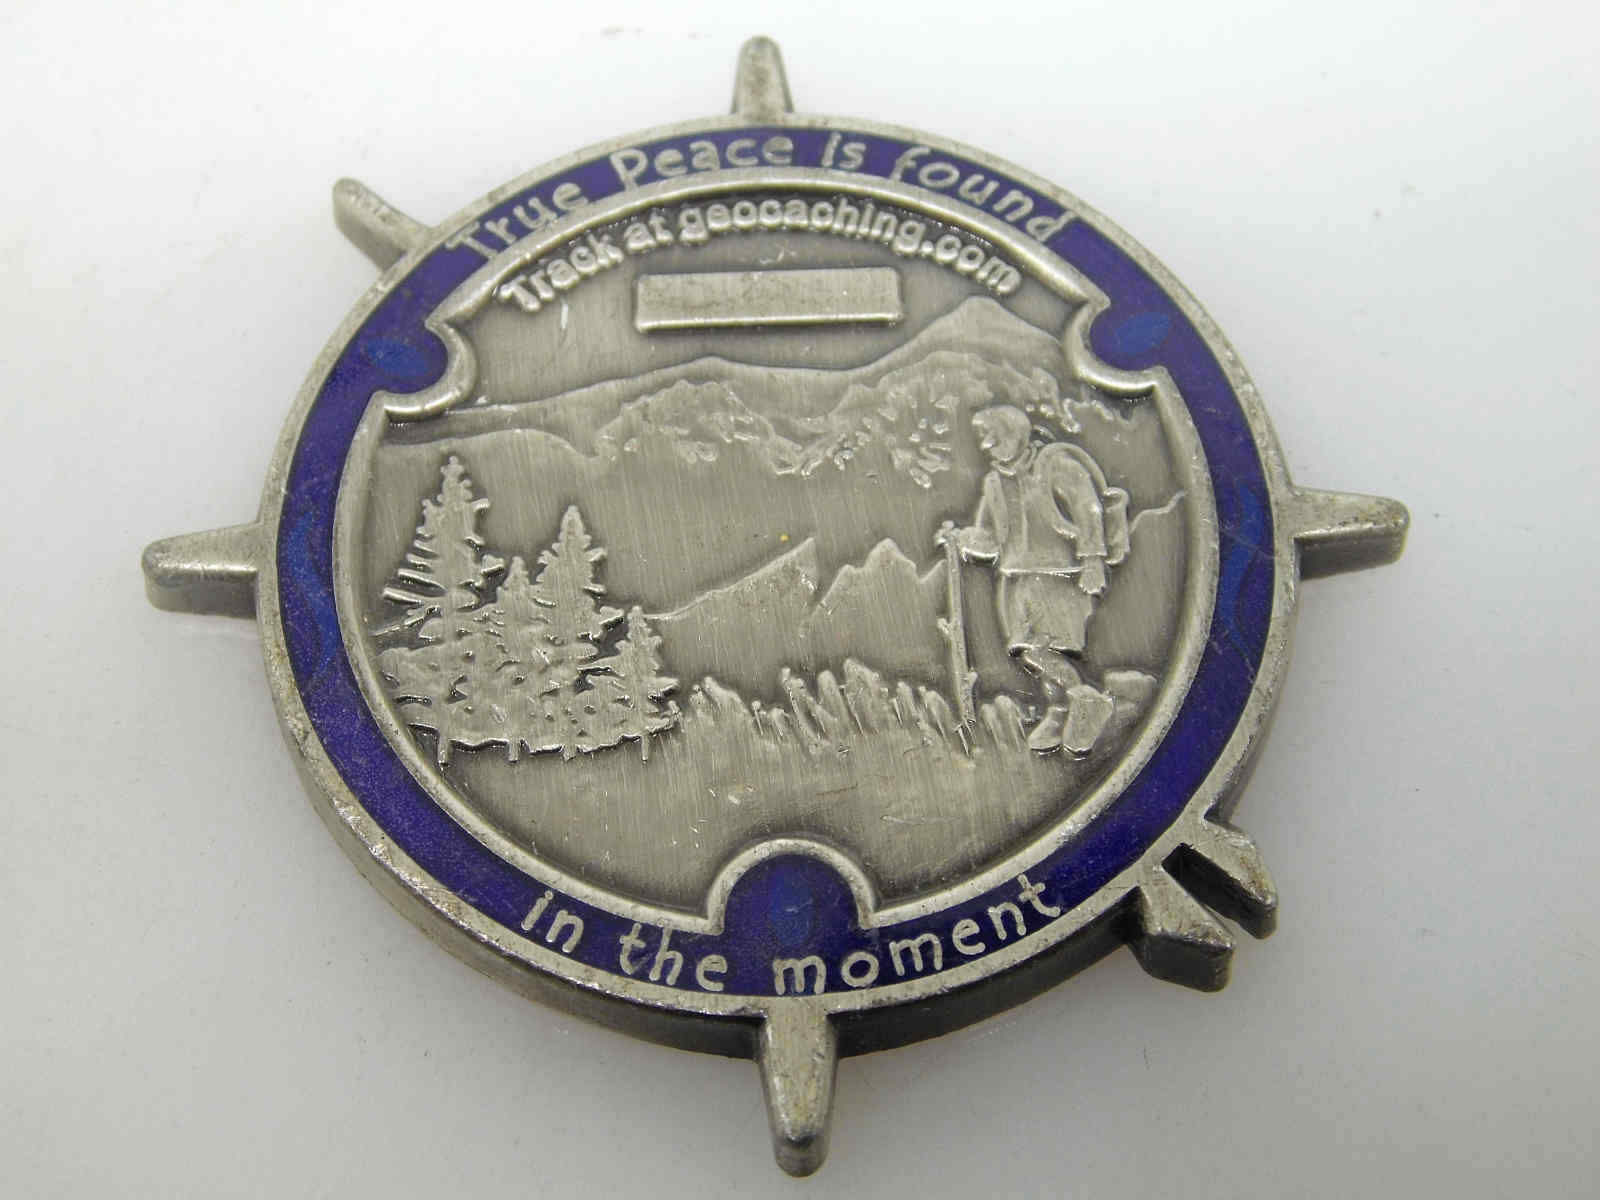 TRUE PEACE IS FOUND IN THE MOMENT CHALLENGE COIN